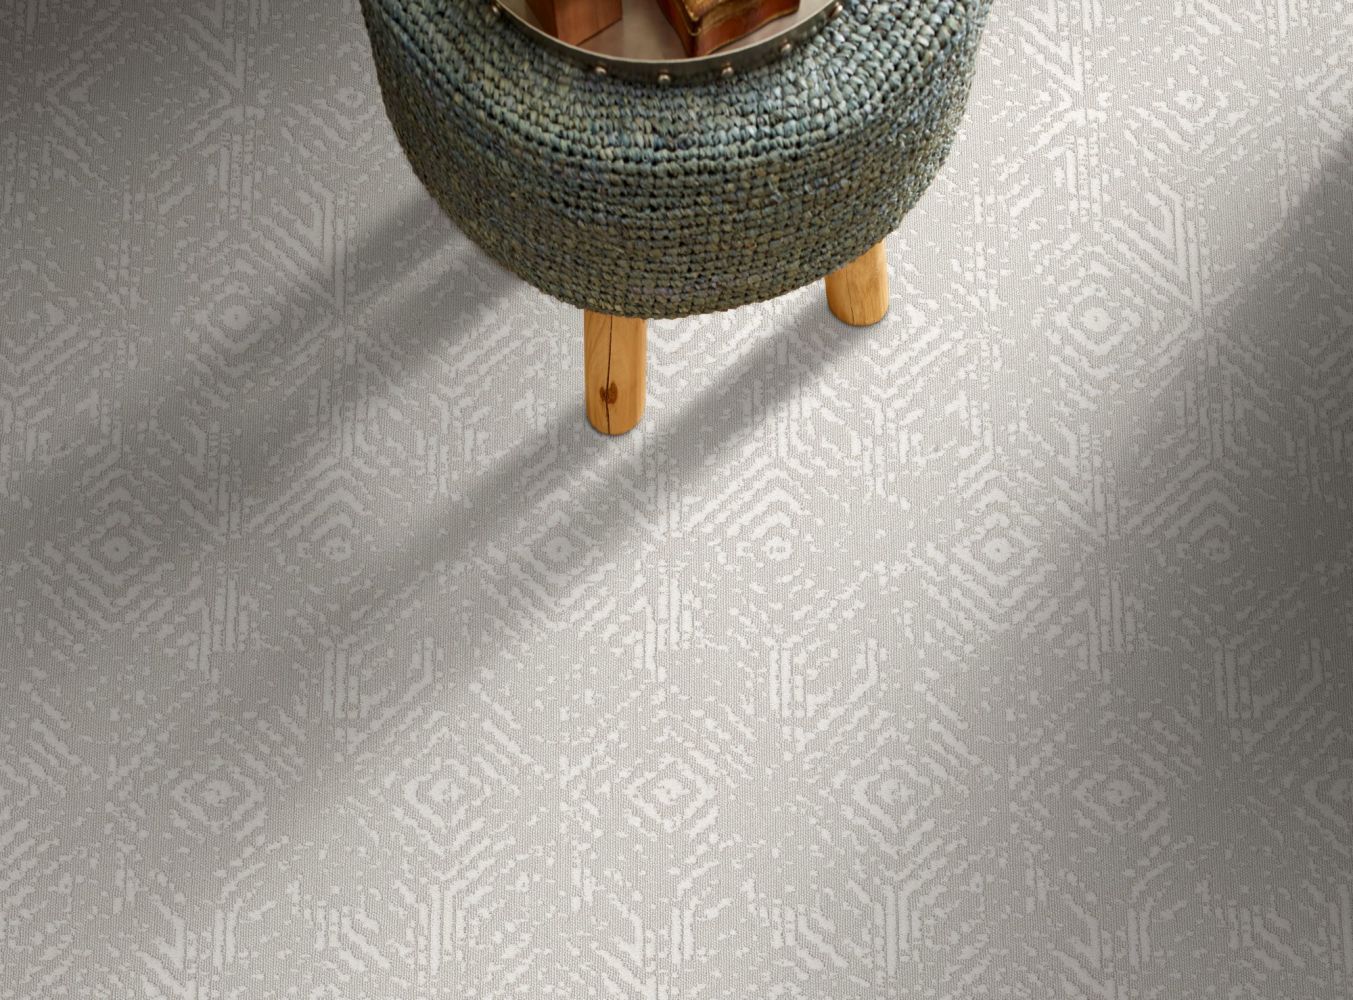 Shaw Floors Value Collections Vintage Revival Net Minimal 00514_5E381